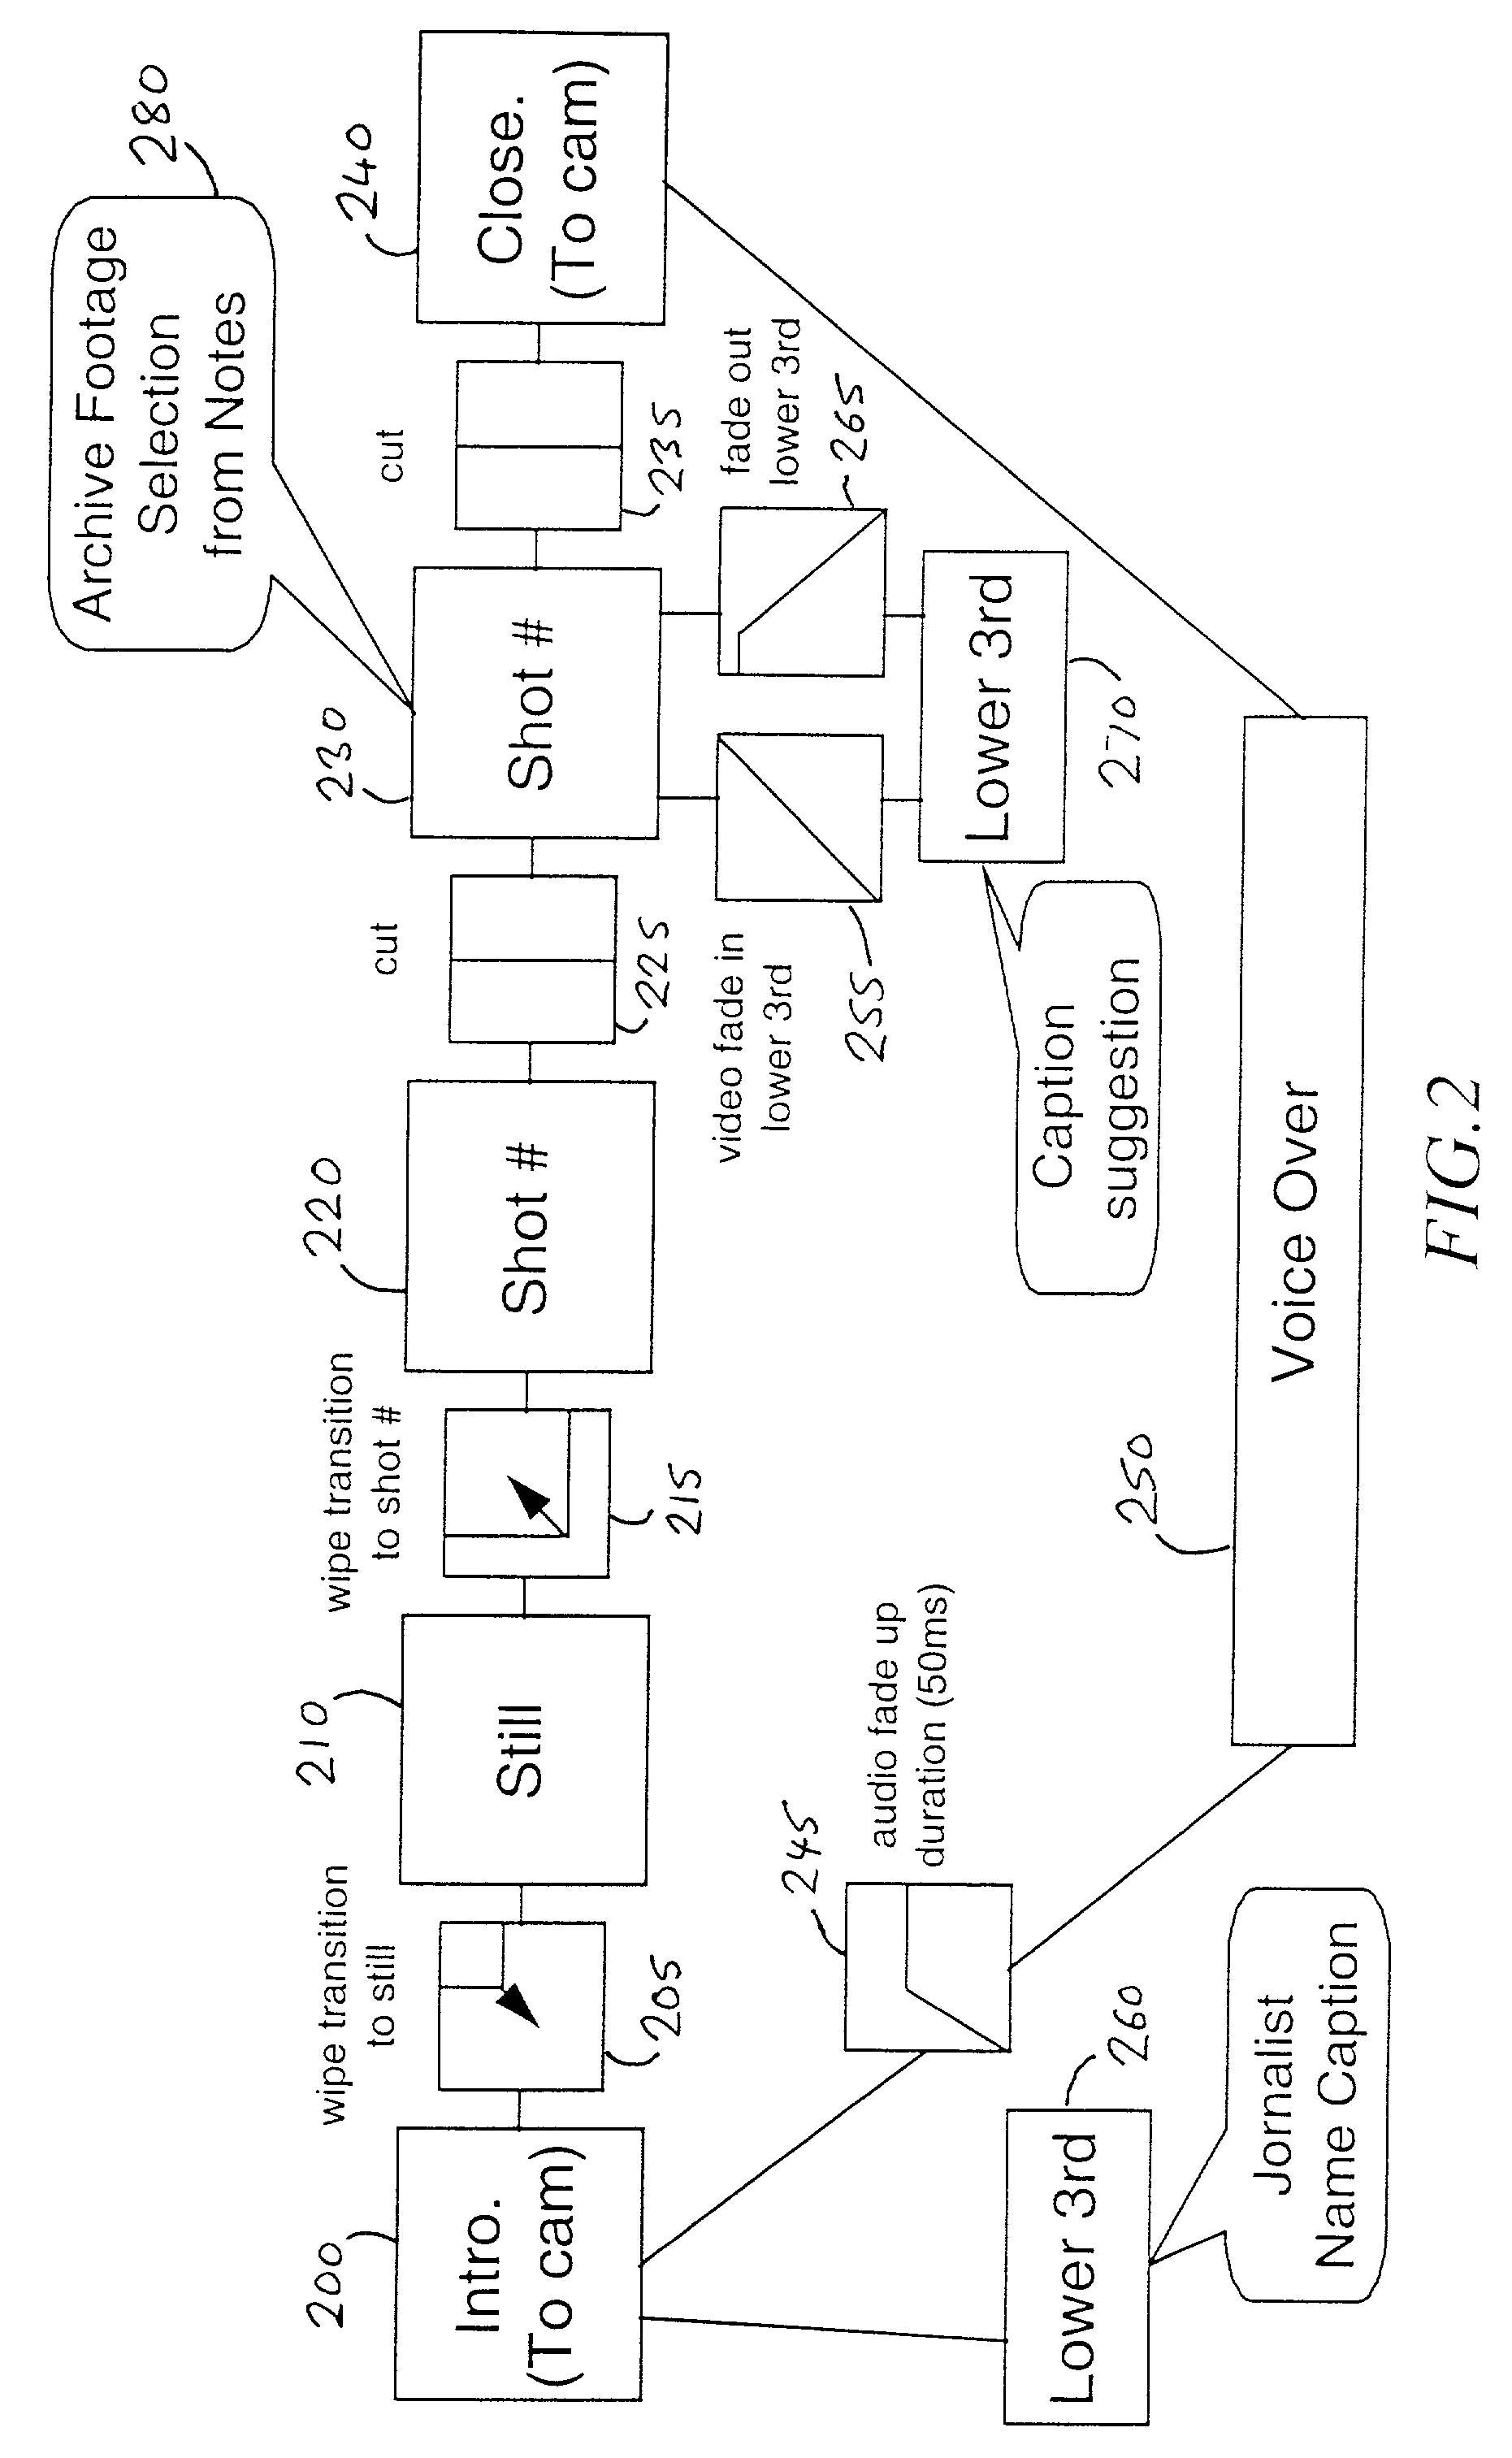 System and method for editing source content to produce an edited content sequence